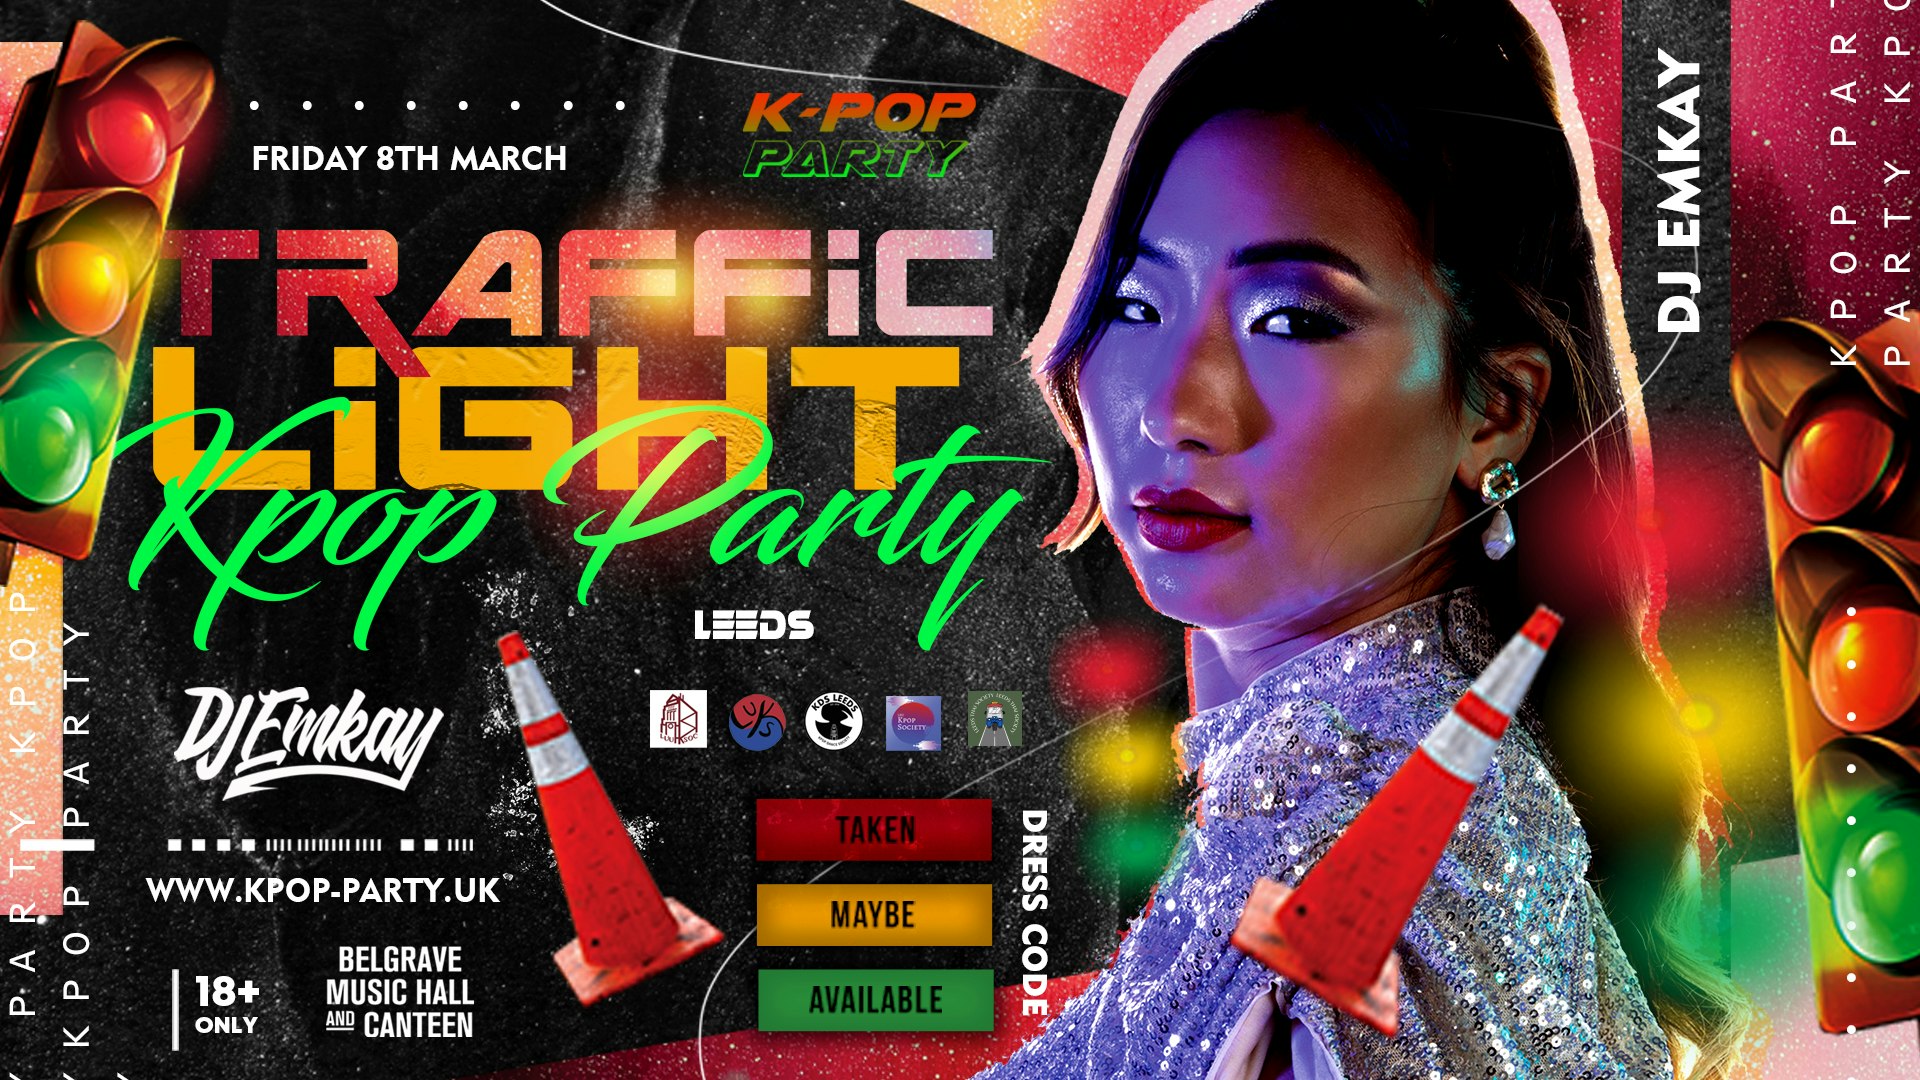 K-Pop TRAFFIC LIGHT Party Leeds with DJ EMKAY | Friday 8th March